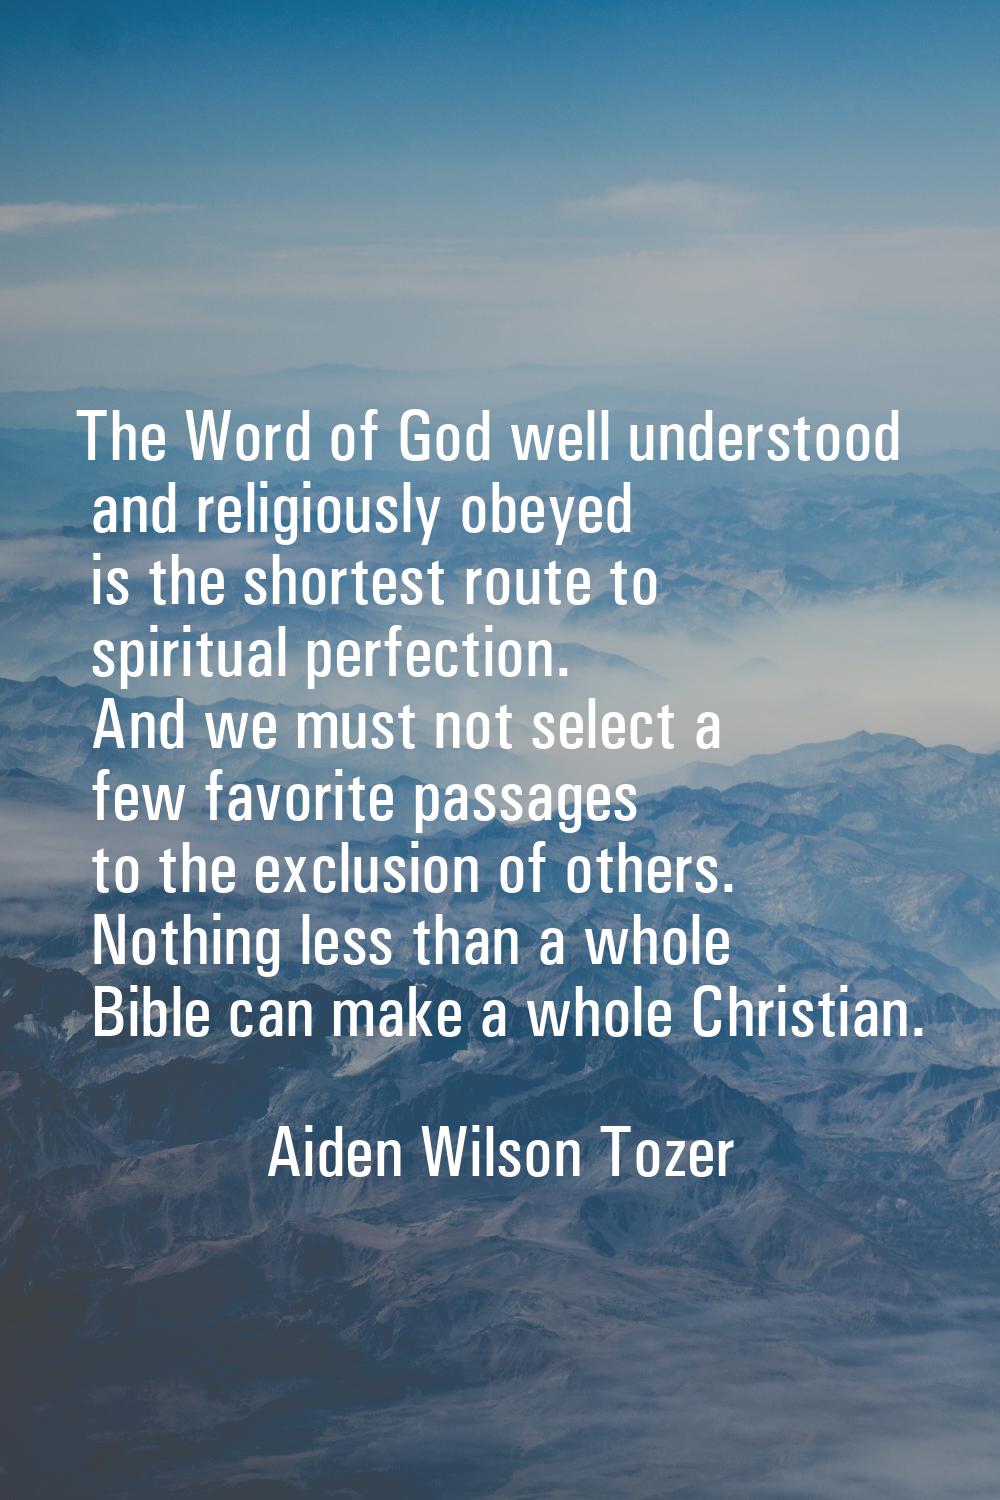 The Word of God well understood and religiously obeyed is the shortest route to spiritual perfectio